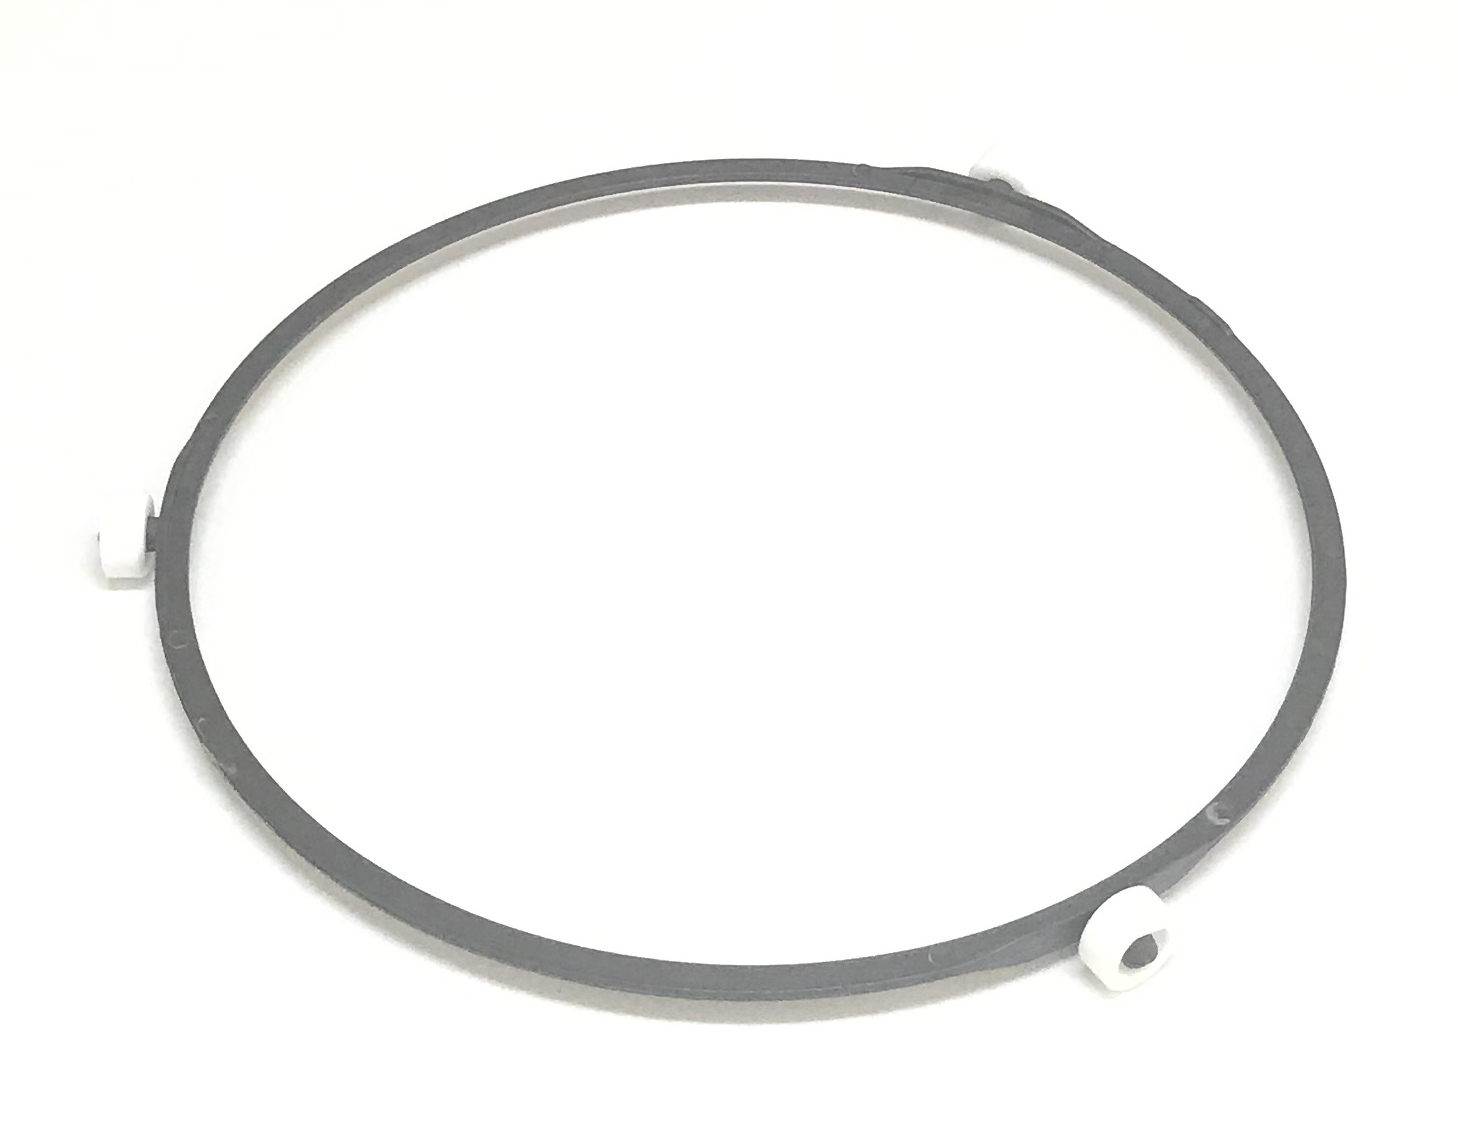 Samsung NEW OEM Samsung Microwave Plate Ring Shipped With ME18H704SFS/A2, ME18H704SFS/AA